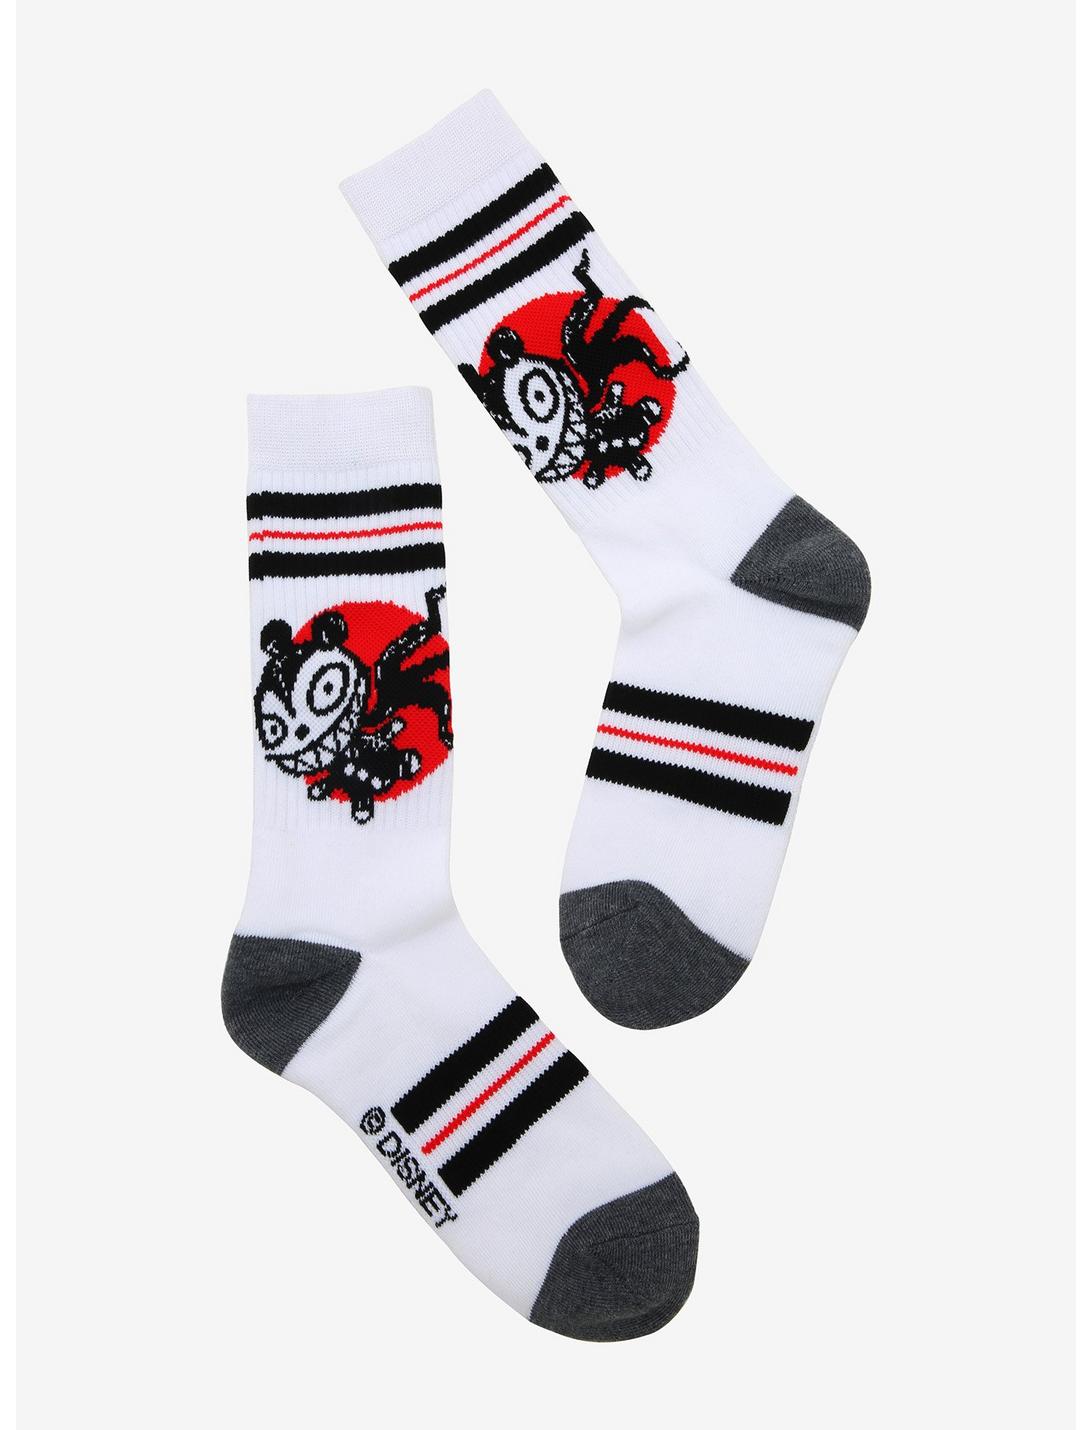 The Nightmare Before Christmas Scary Teddy Stripe Crew Socks | Hot Topic